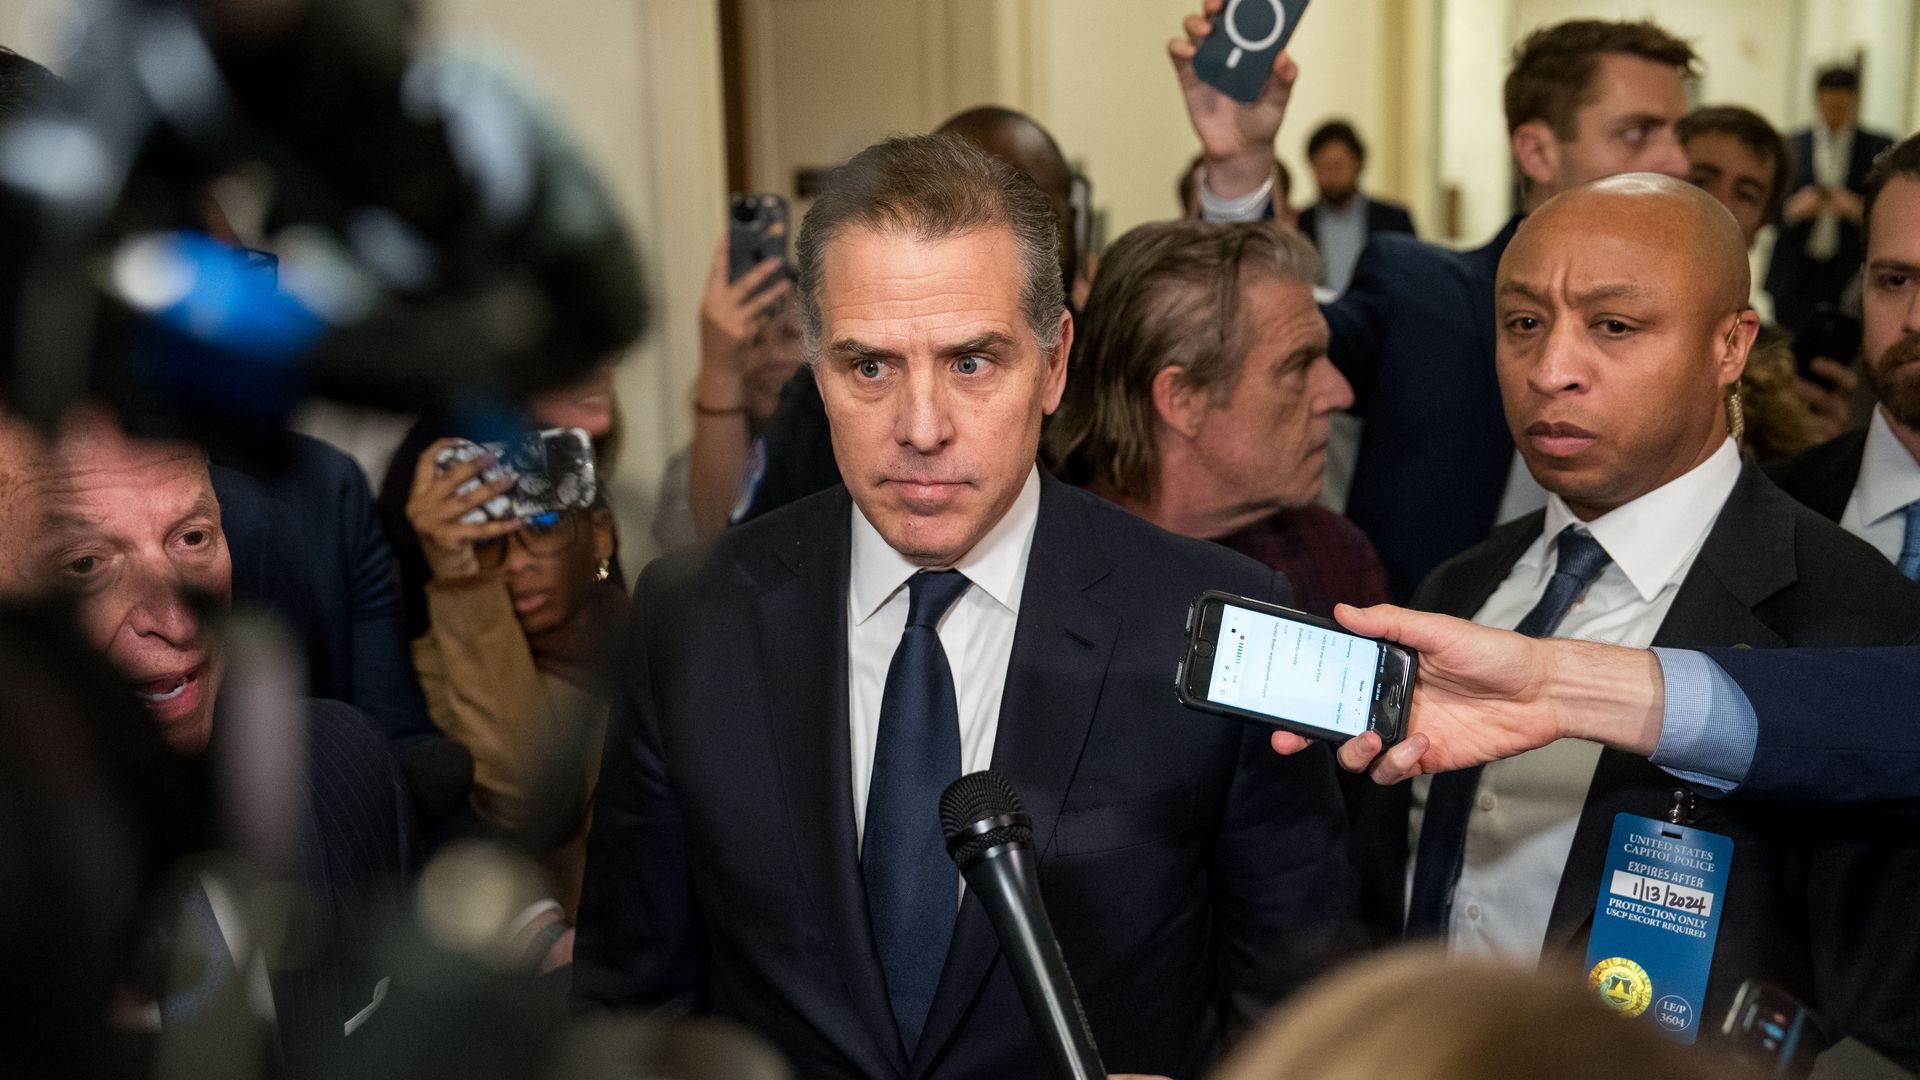 Hunter Biden is surrounded by microphones and recorders in Congressional halls